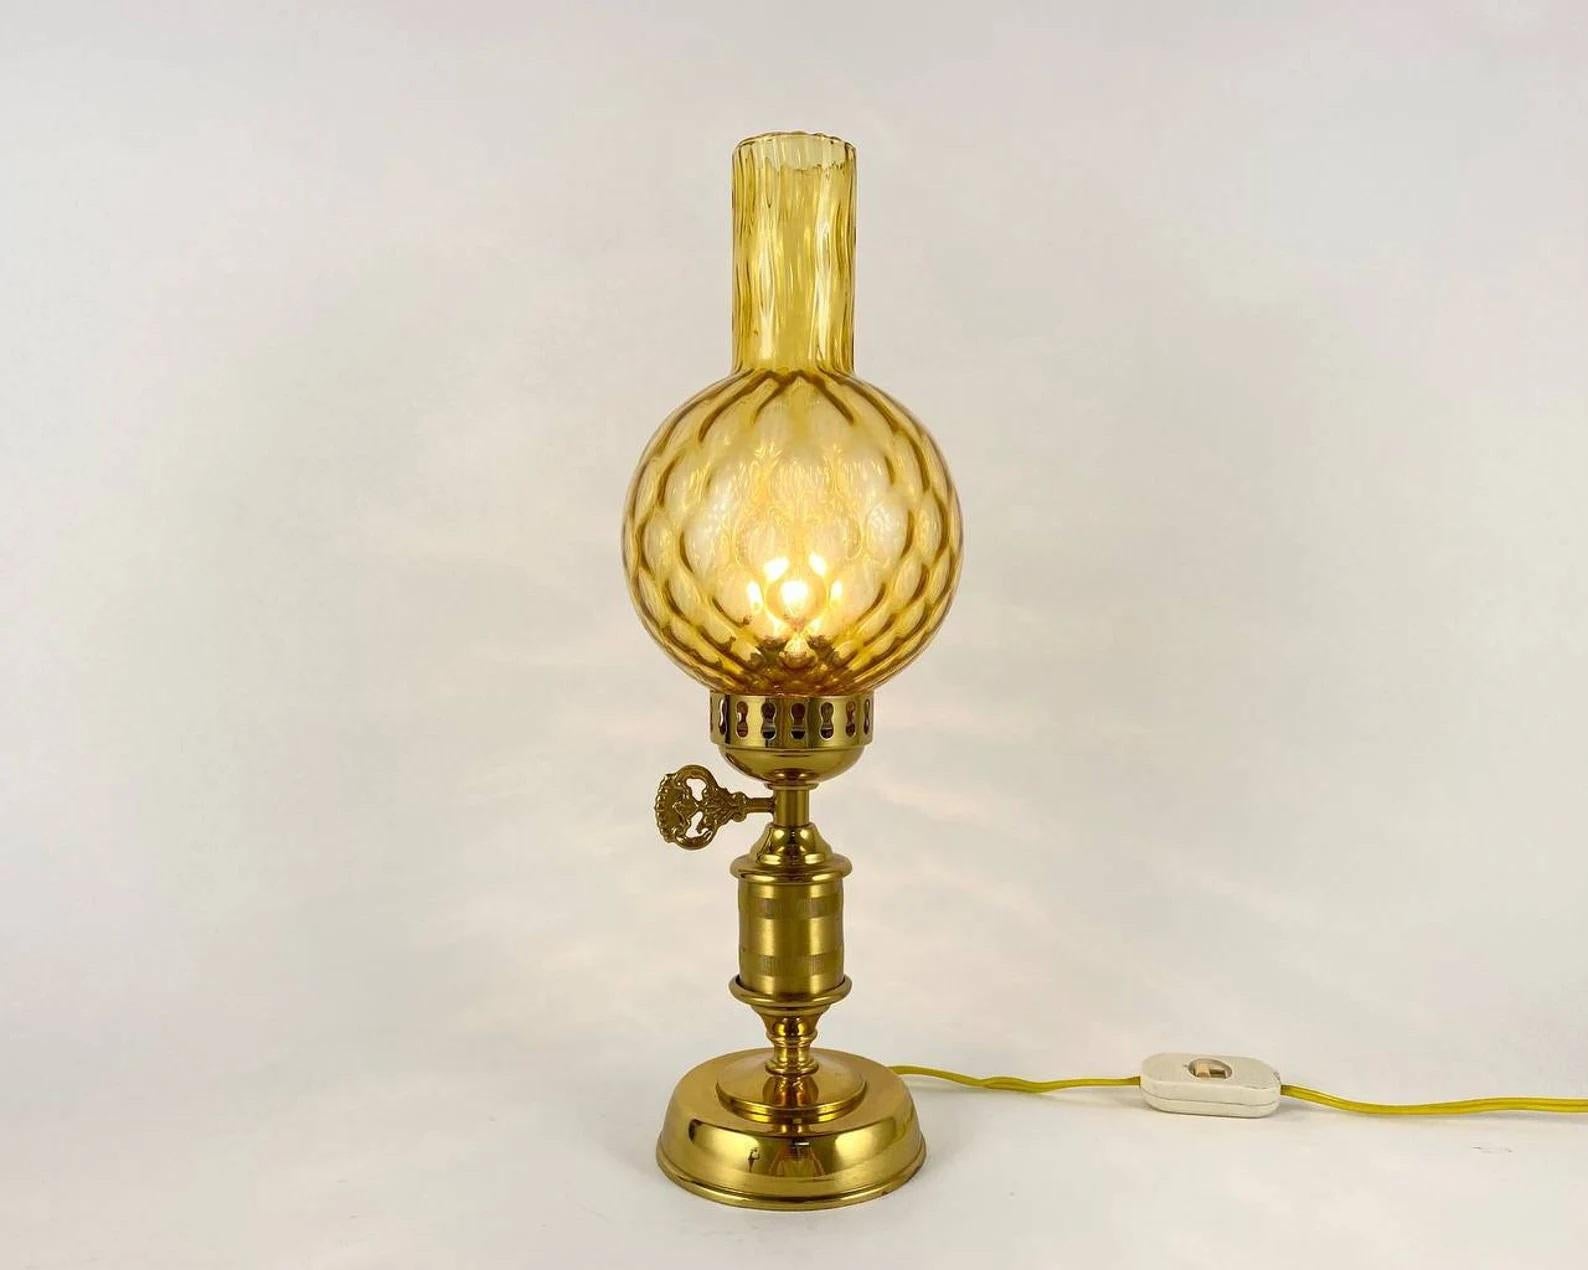 Absolutely charming vintage electric lamp made of gilded metal and the corresponding glass lampshade - sculpted in the style of kerosene lamps, made in 1980s in Germany.

The first kerosene lamp was designed by the Polish inventor Ignacy